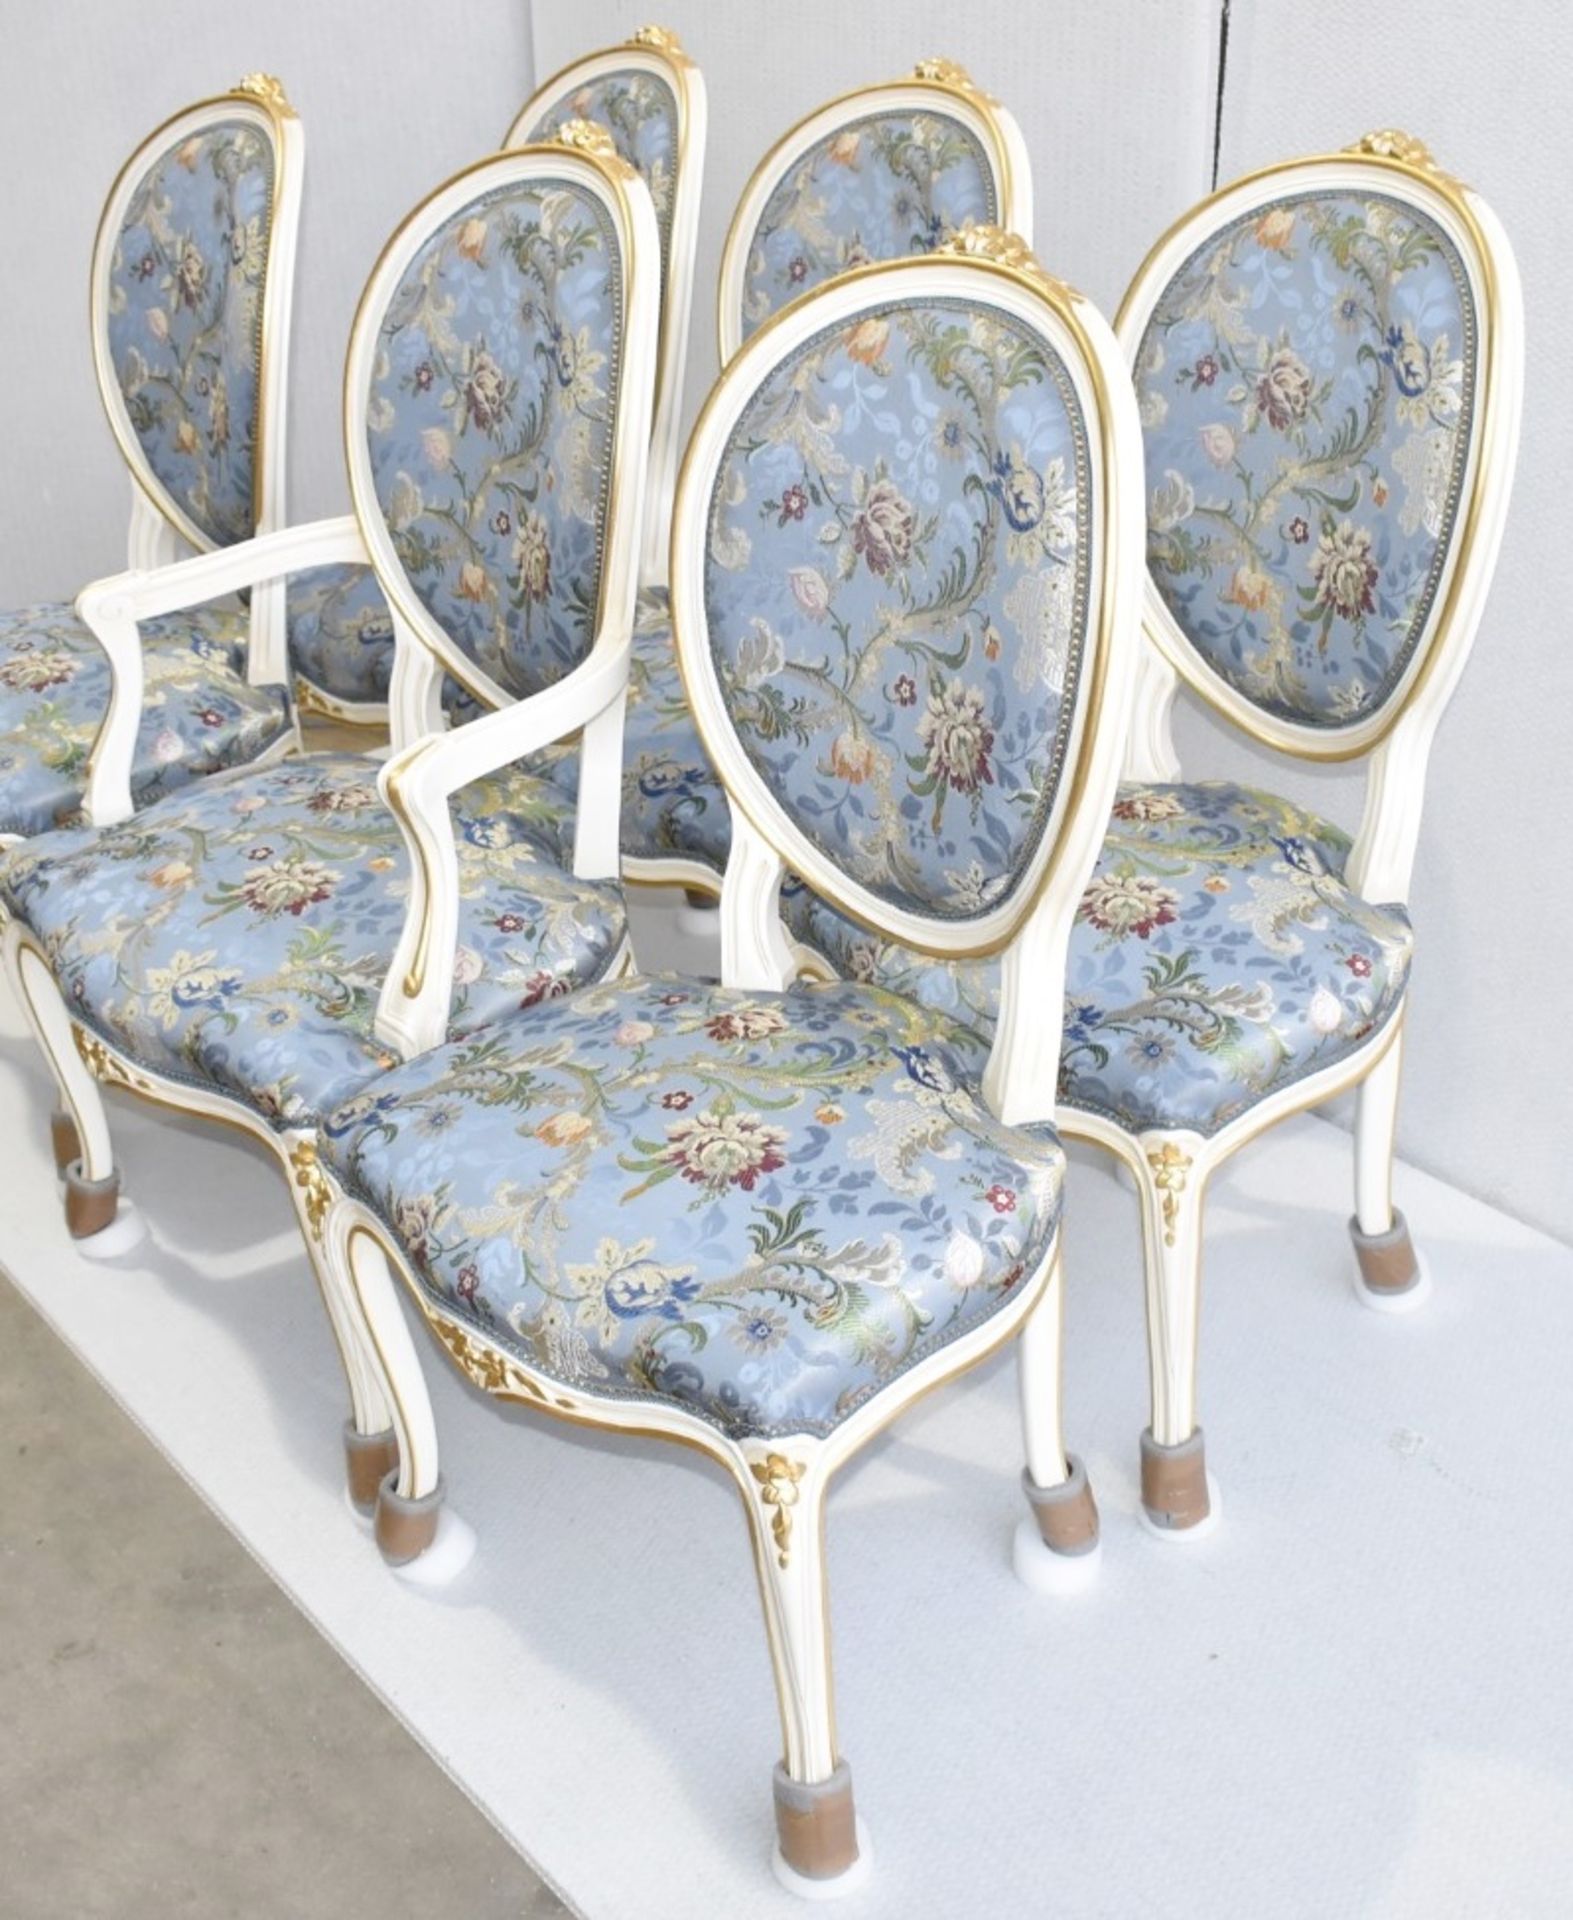 Set of 6 x ANGELO CAPPELLINI 'Timeless' Baroque-style Carved Dining Chairs, Floral Upholstered - Image 13 of 14